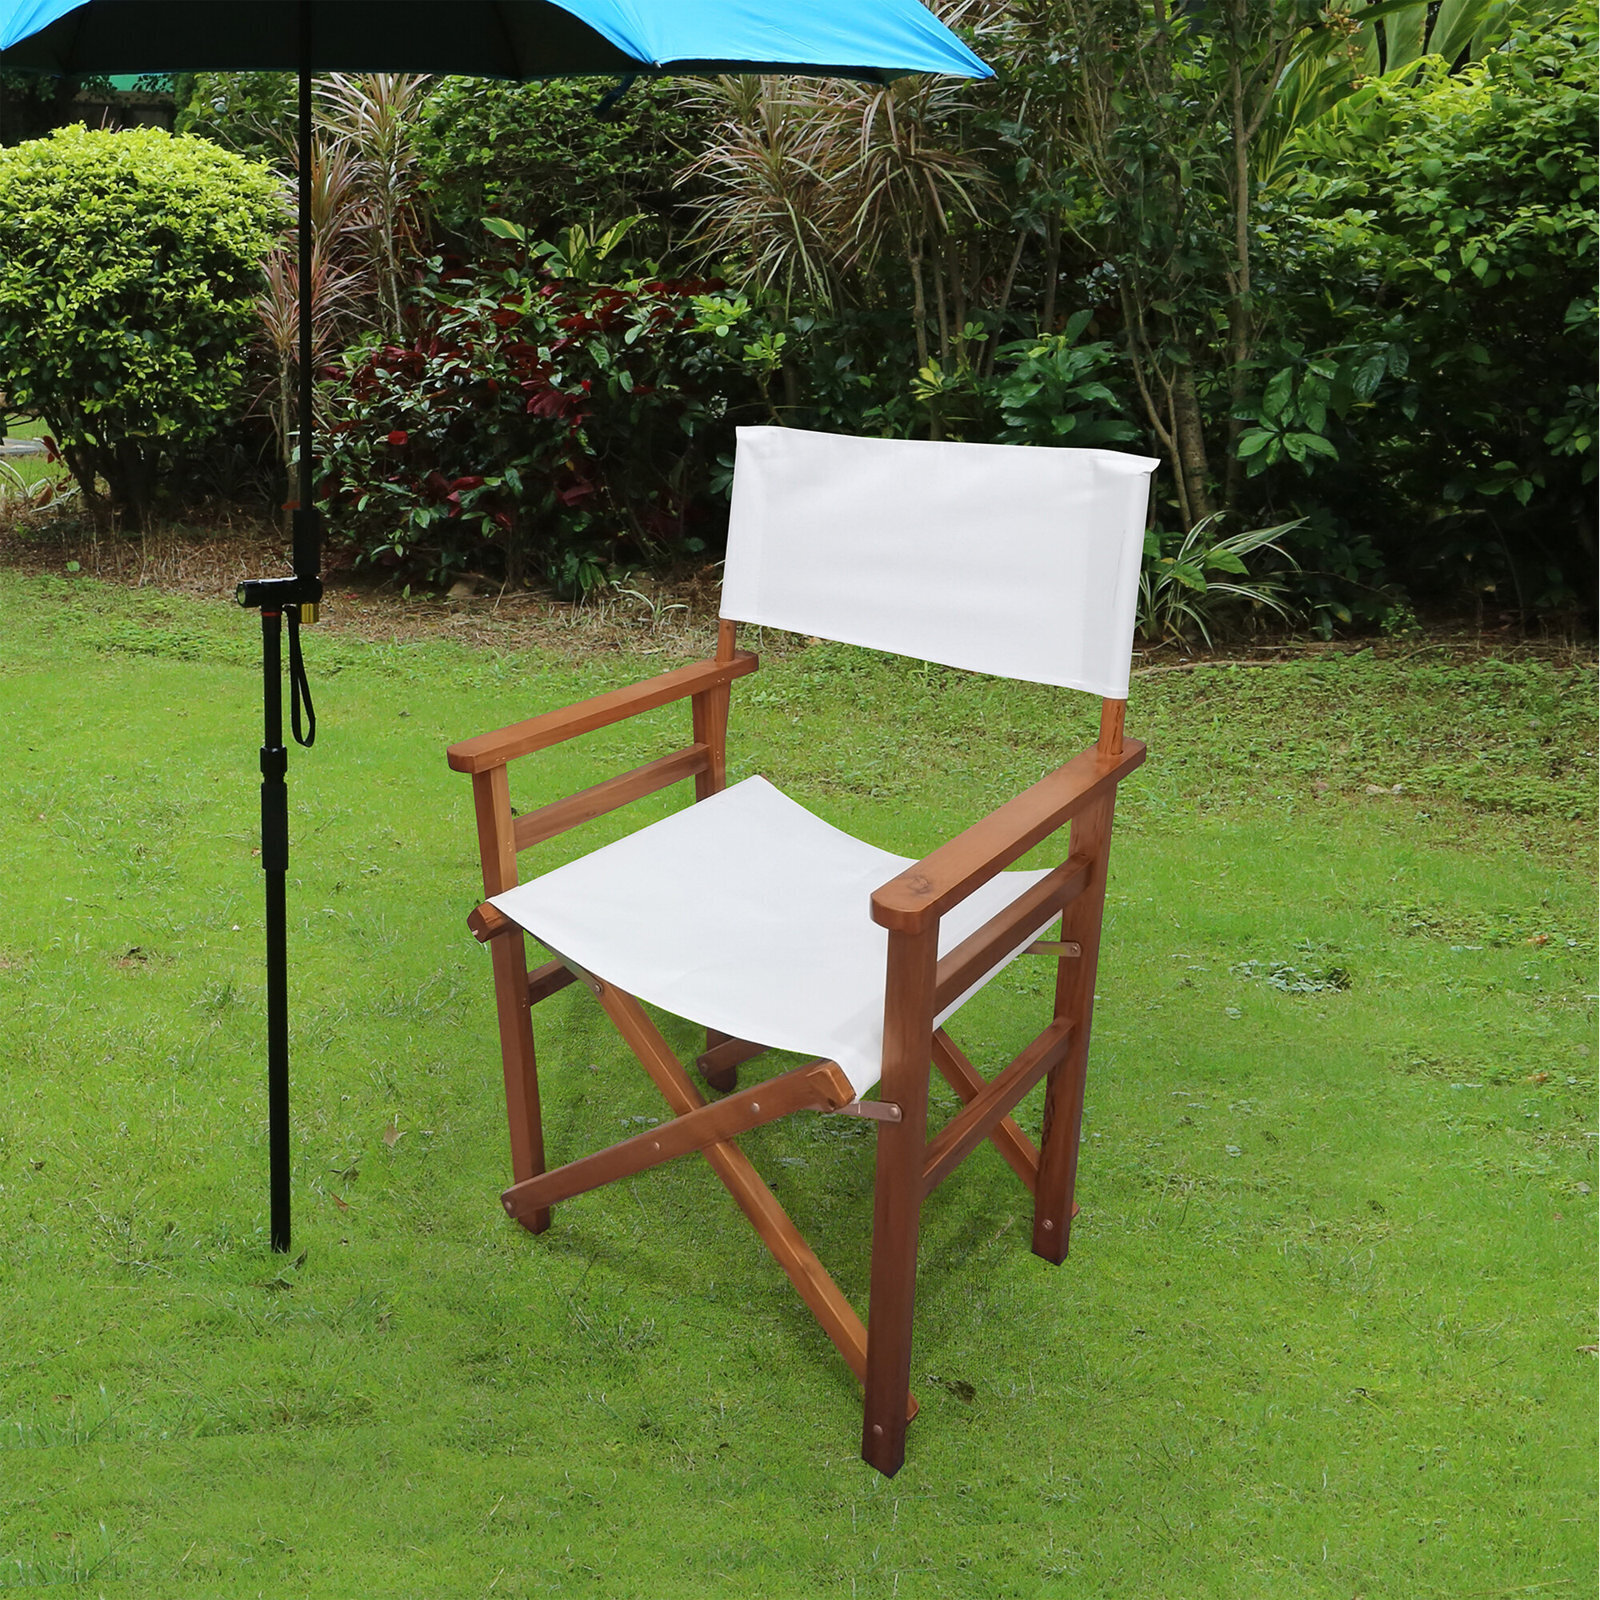 Outdoor Canvas Patio Chairs (Set of 2)